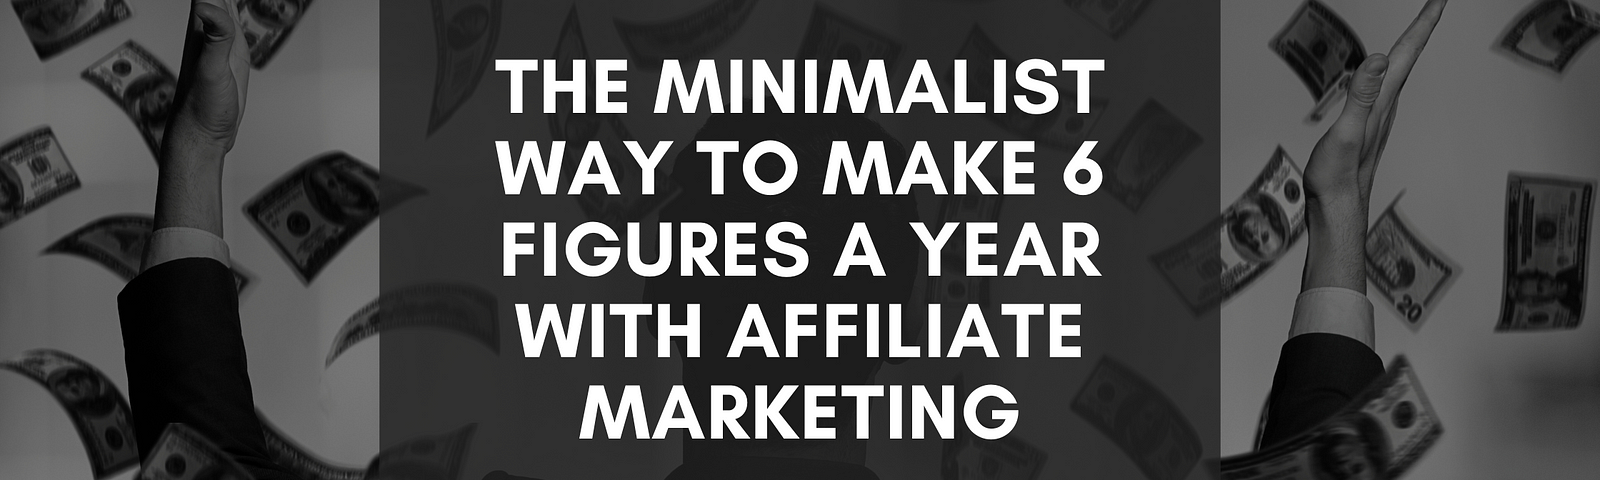 The Minimalist Way To Make 6 Figures A Year With Affiliate Marketing